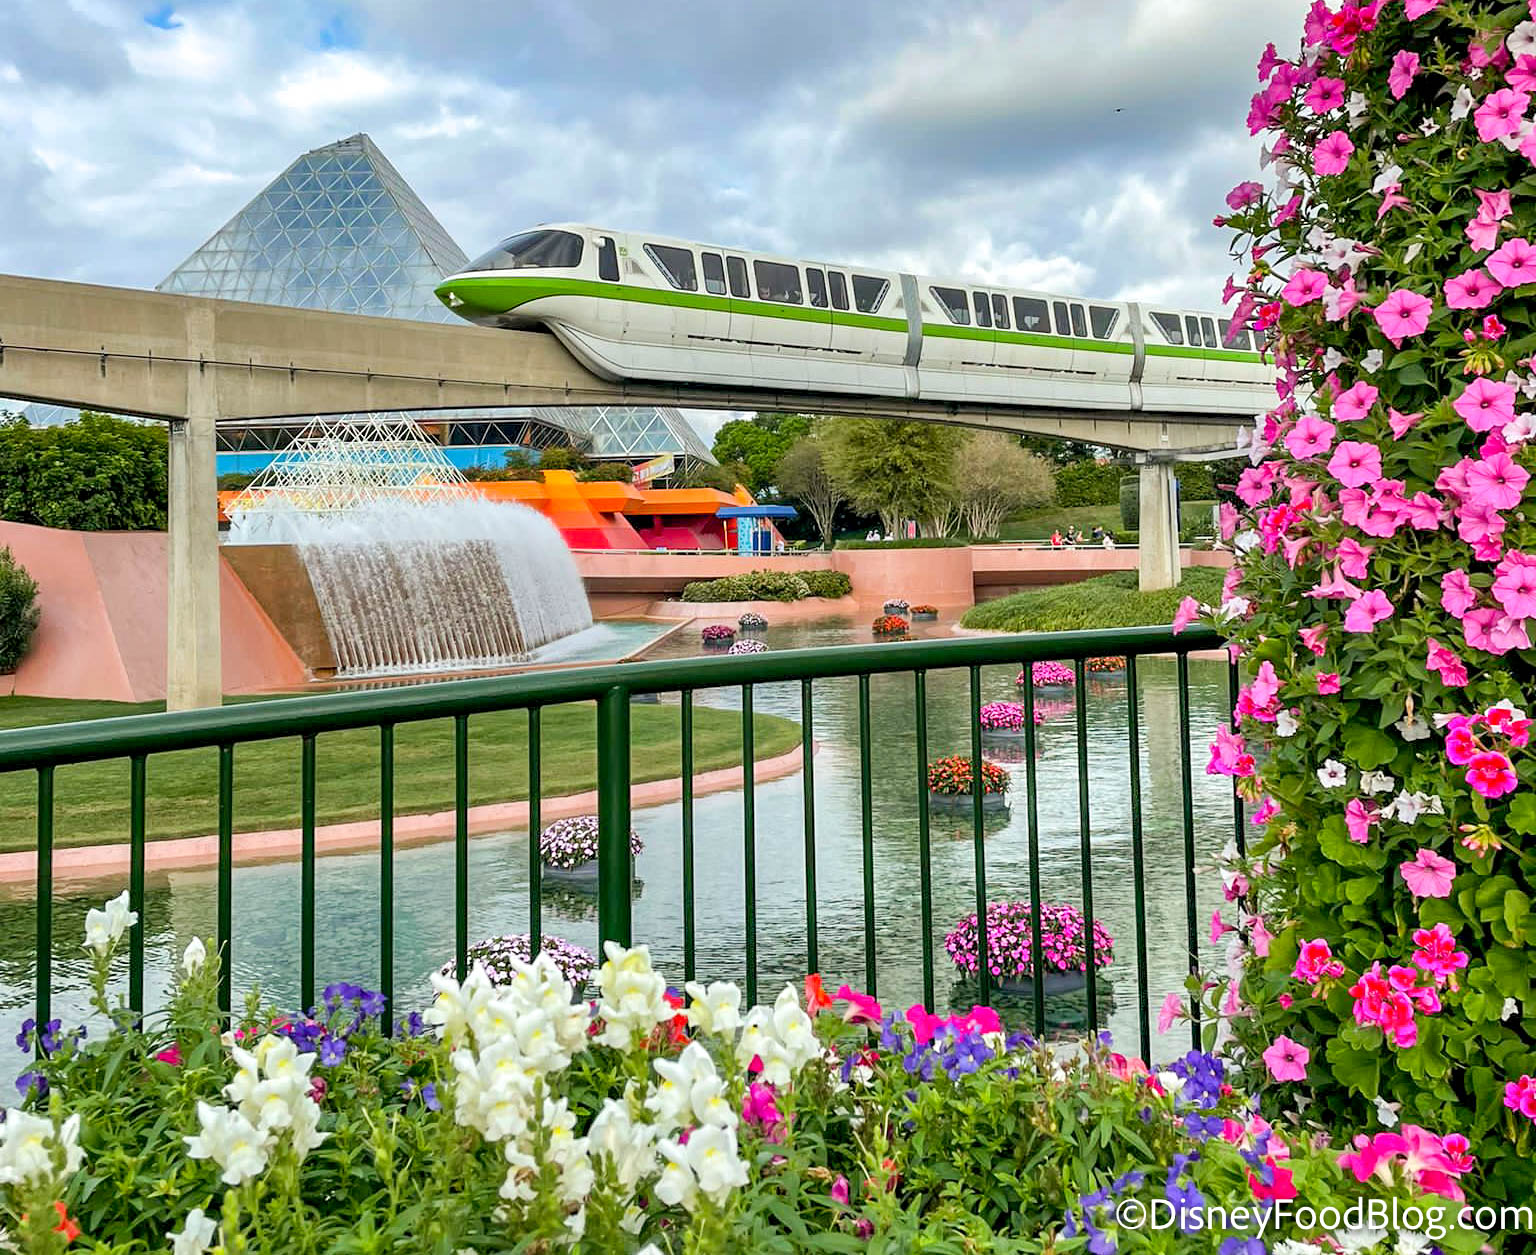 Disney World Is Changing and These 12 Construction Updates Prove It